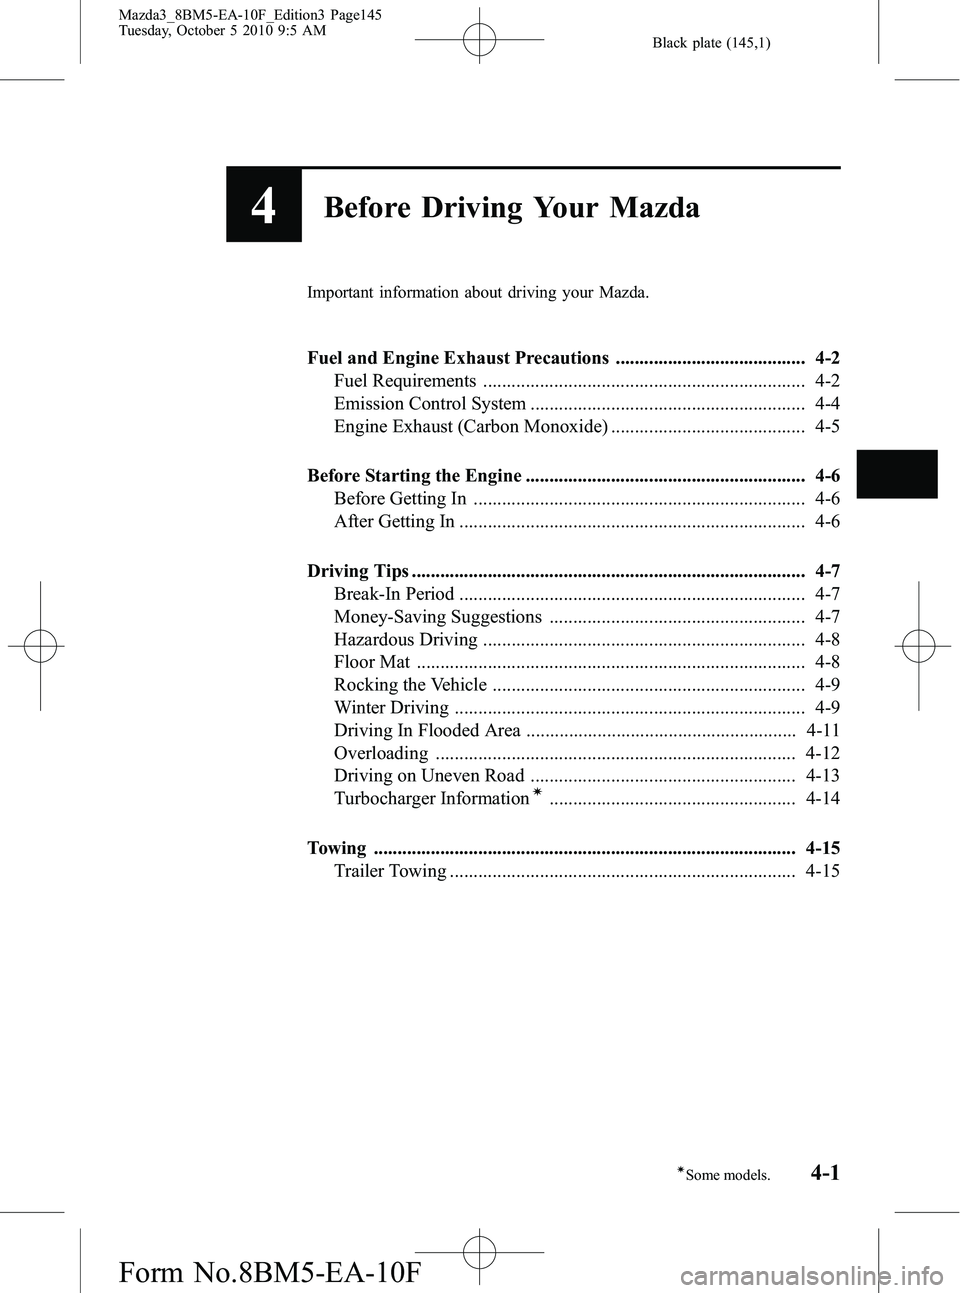 MAZDA MODEL 3 5-DOOR 2011  Owners Manual Black plate (145,1)
4Before Driving Your Mazda
Important information about driving your Mazda.
Fuel and Engine Exhaust Precautions ........................................ 4-2Fuel Requirements .......